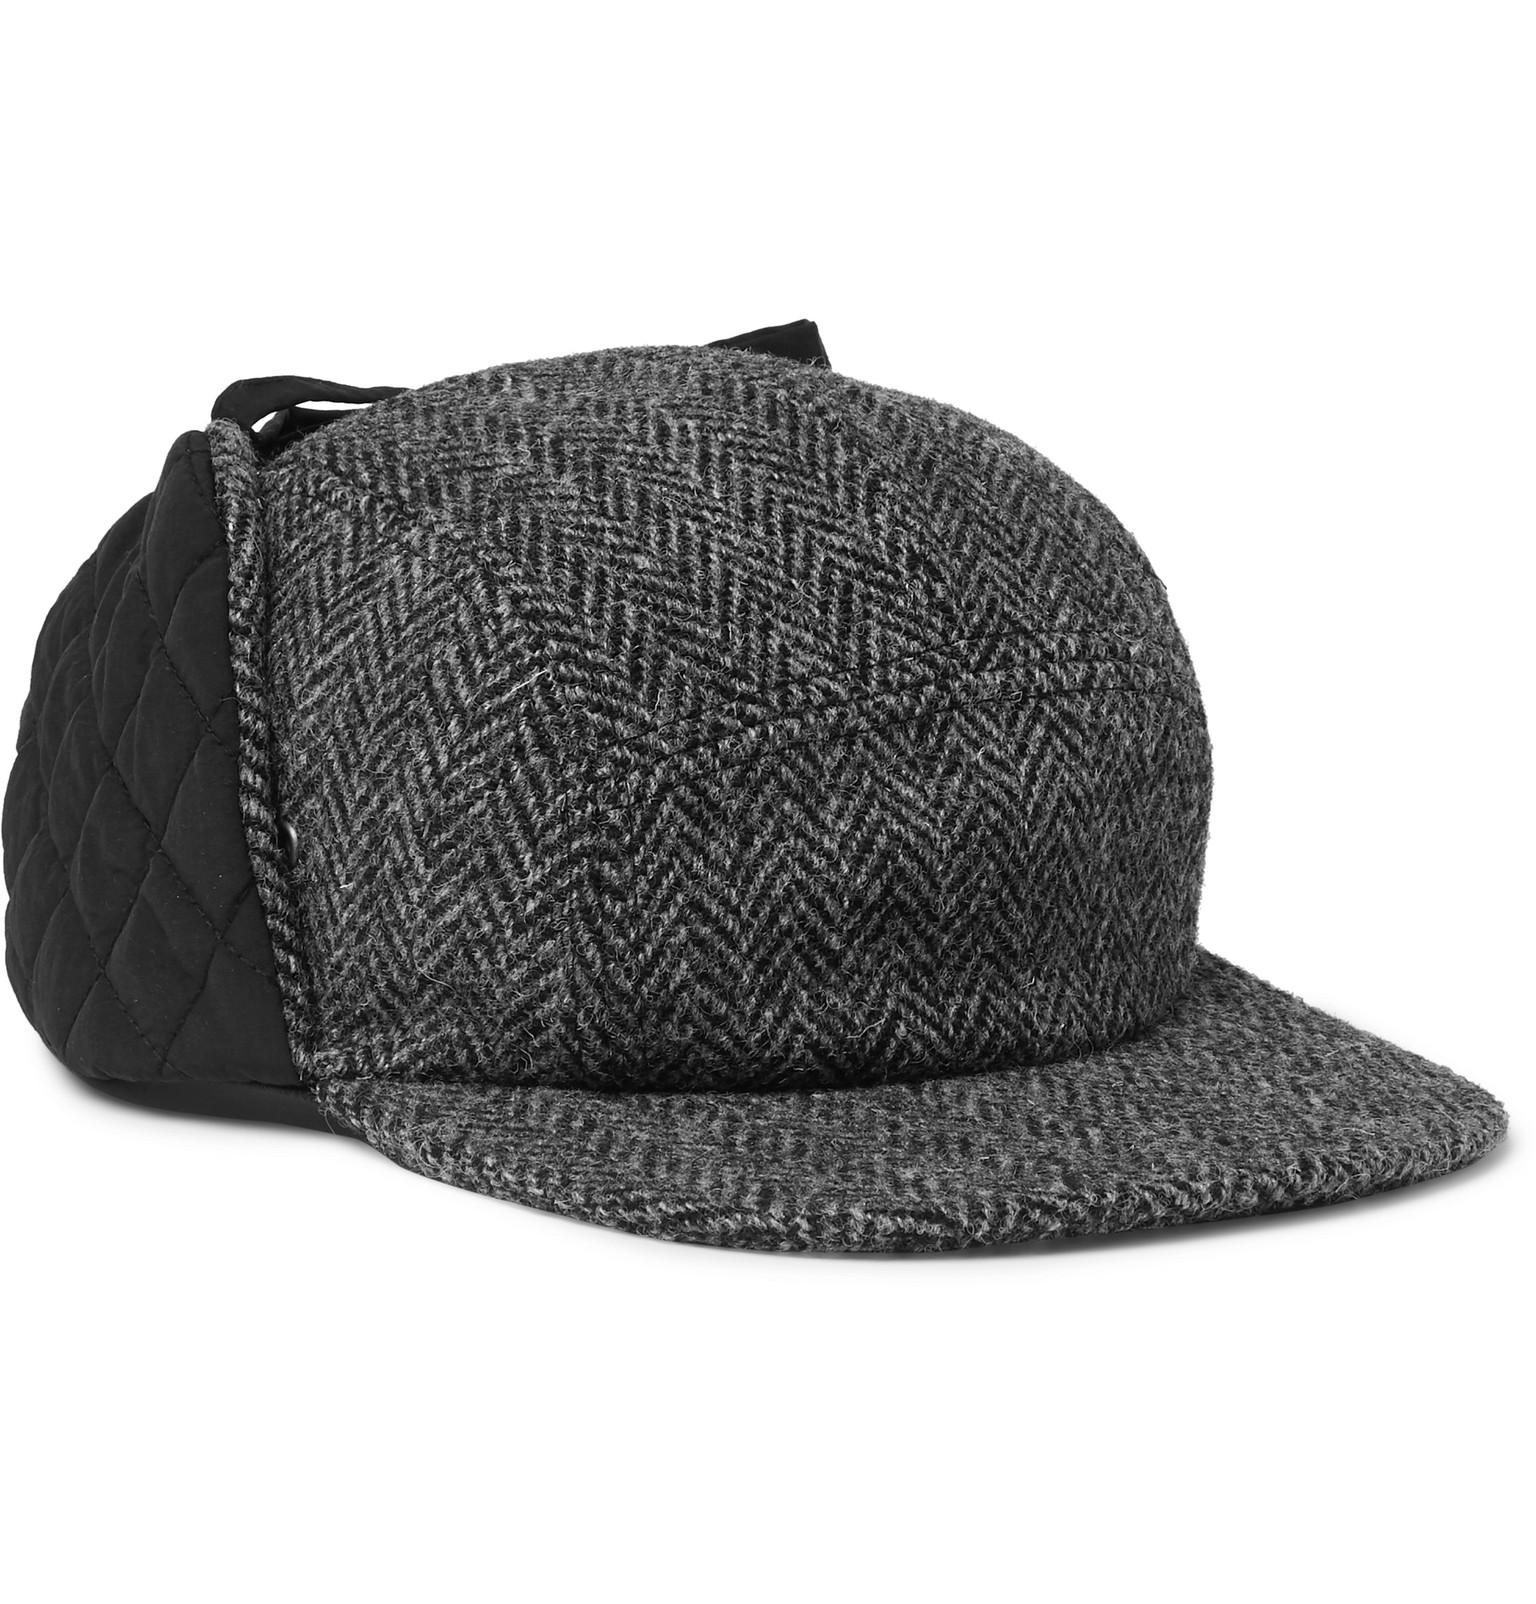 converse chanel quilted nylon trapper hat